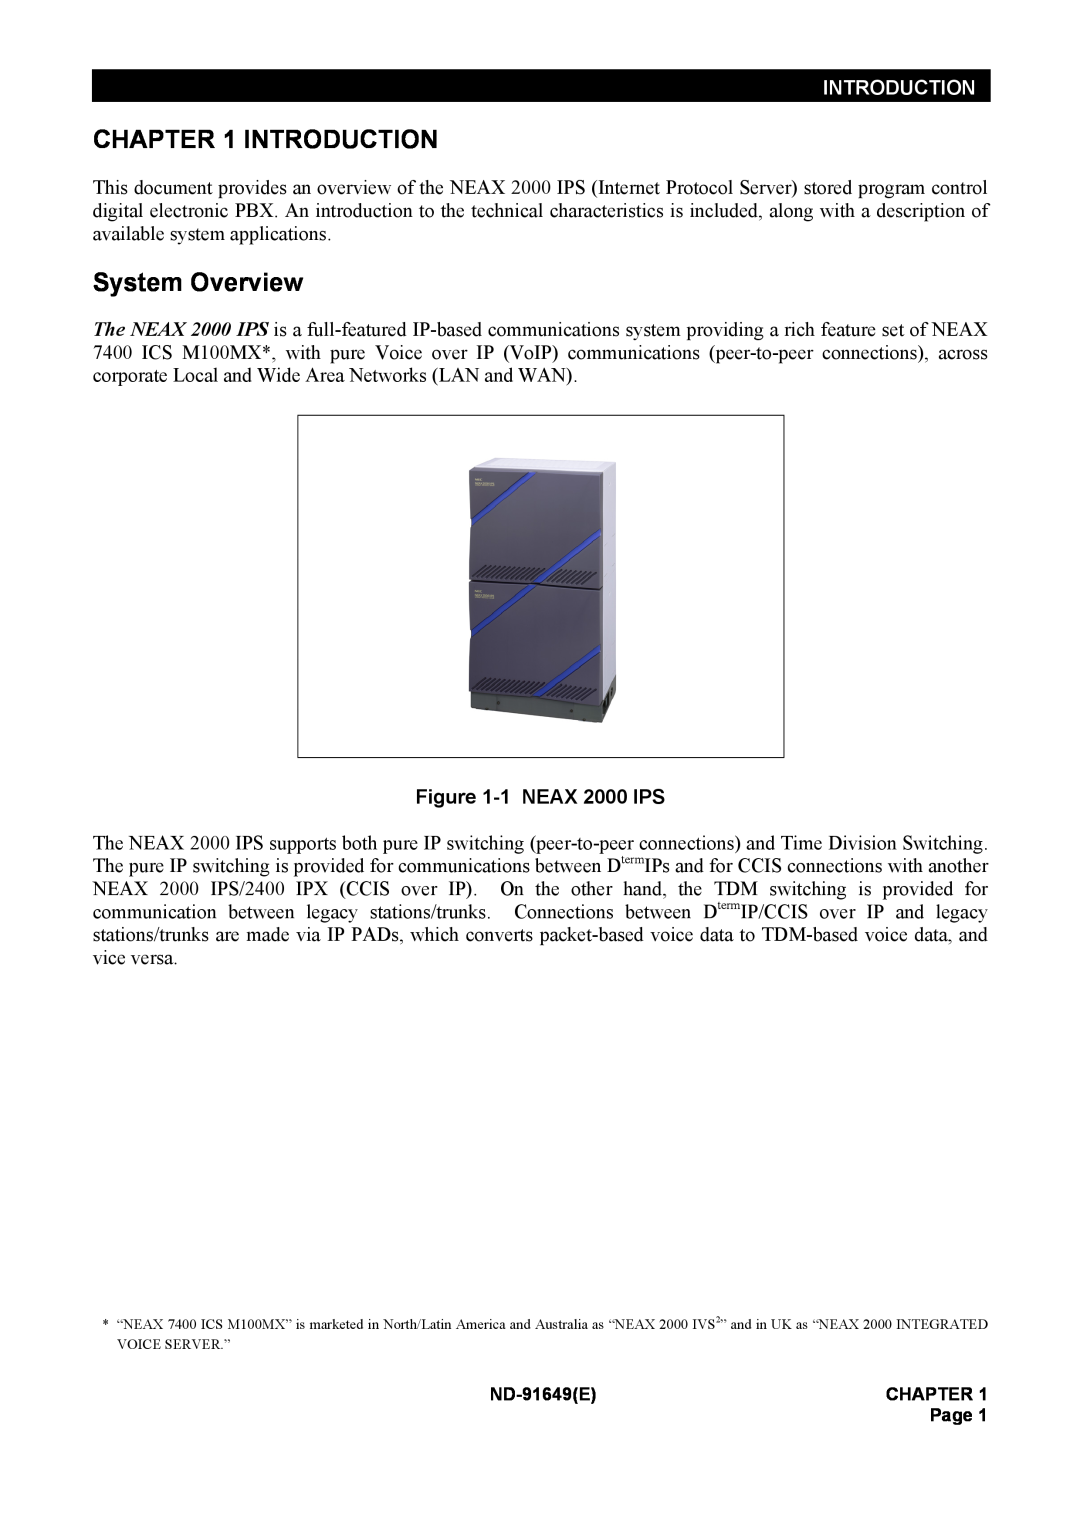 NEC ND-91649 manual Introduction, System Overview, 1 NEAX 2000 IPS 